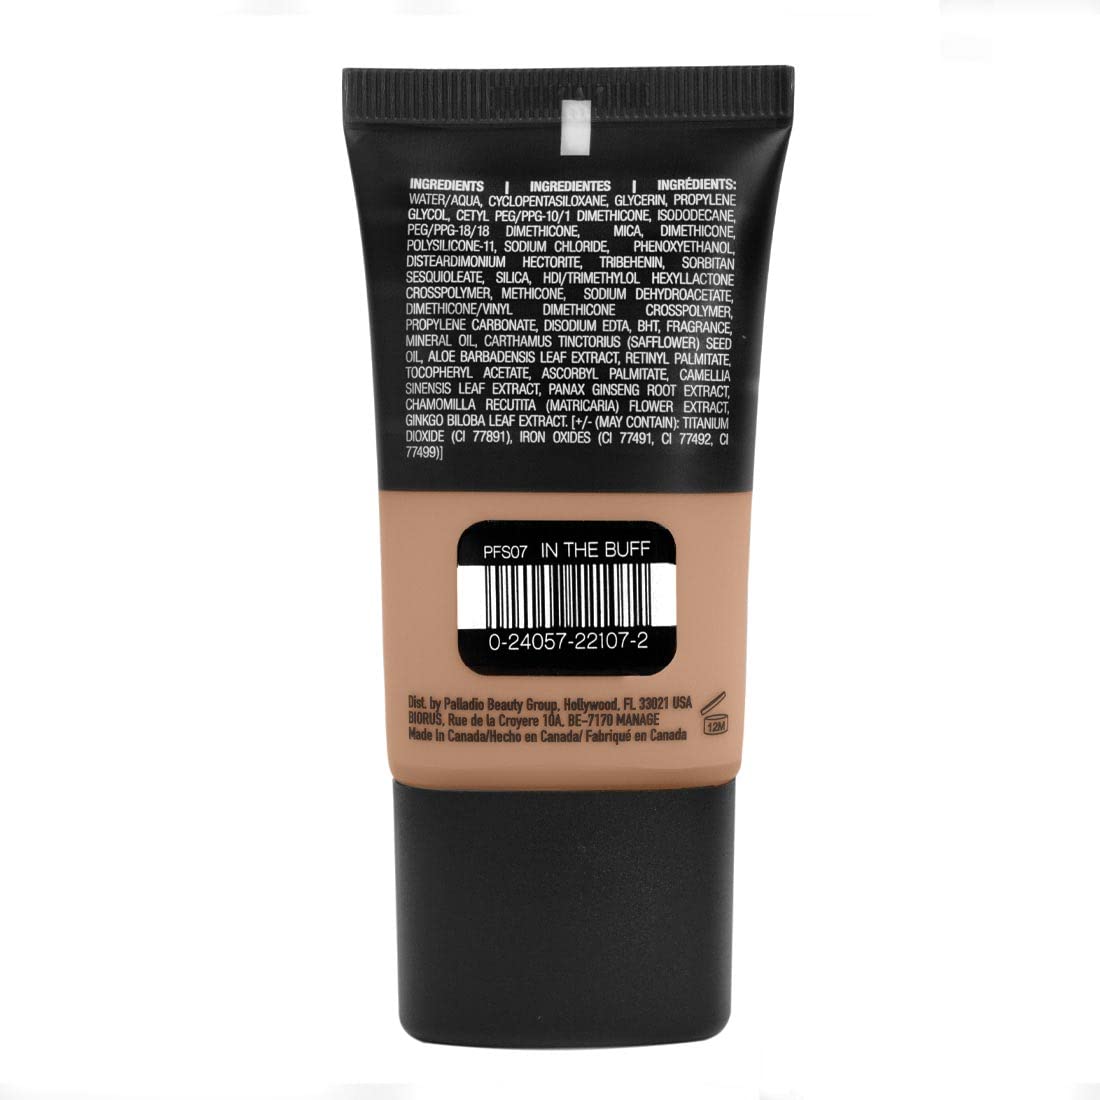 Palladio Powder Finish Liquid Foundation, Natural Matte Appearance, Reduces Fine Lines, Covers Large Pores, Hides Imperfections, All Day Wear, Sheer to Medium Coverage, In the Buff